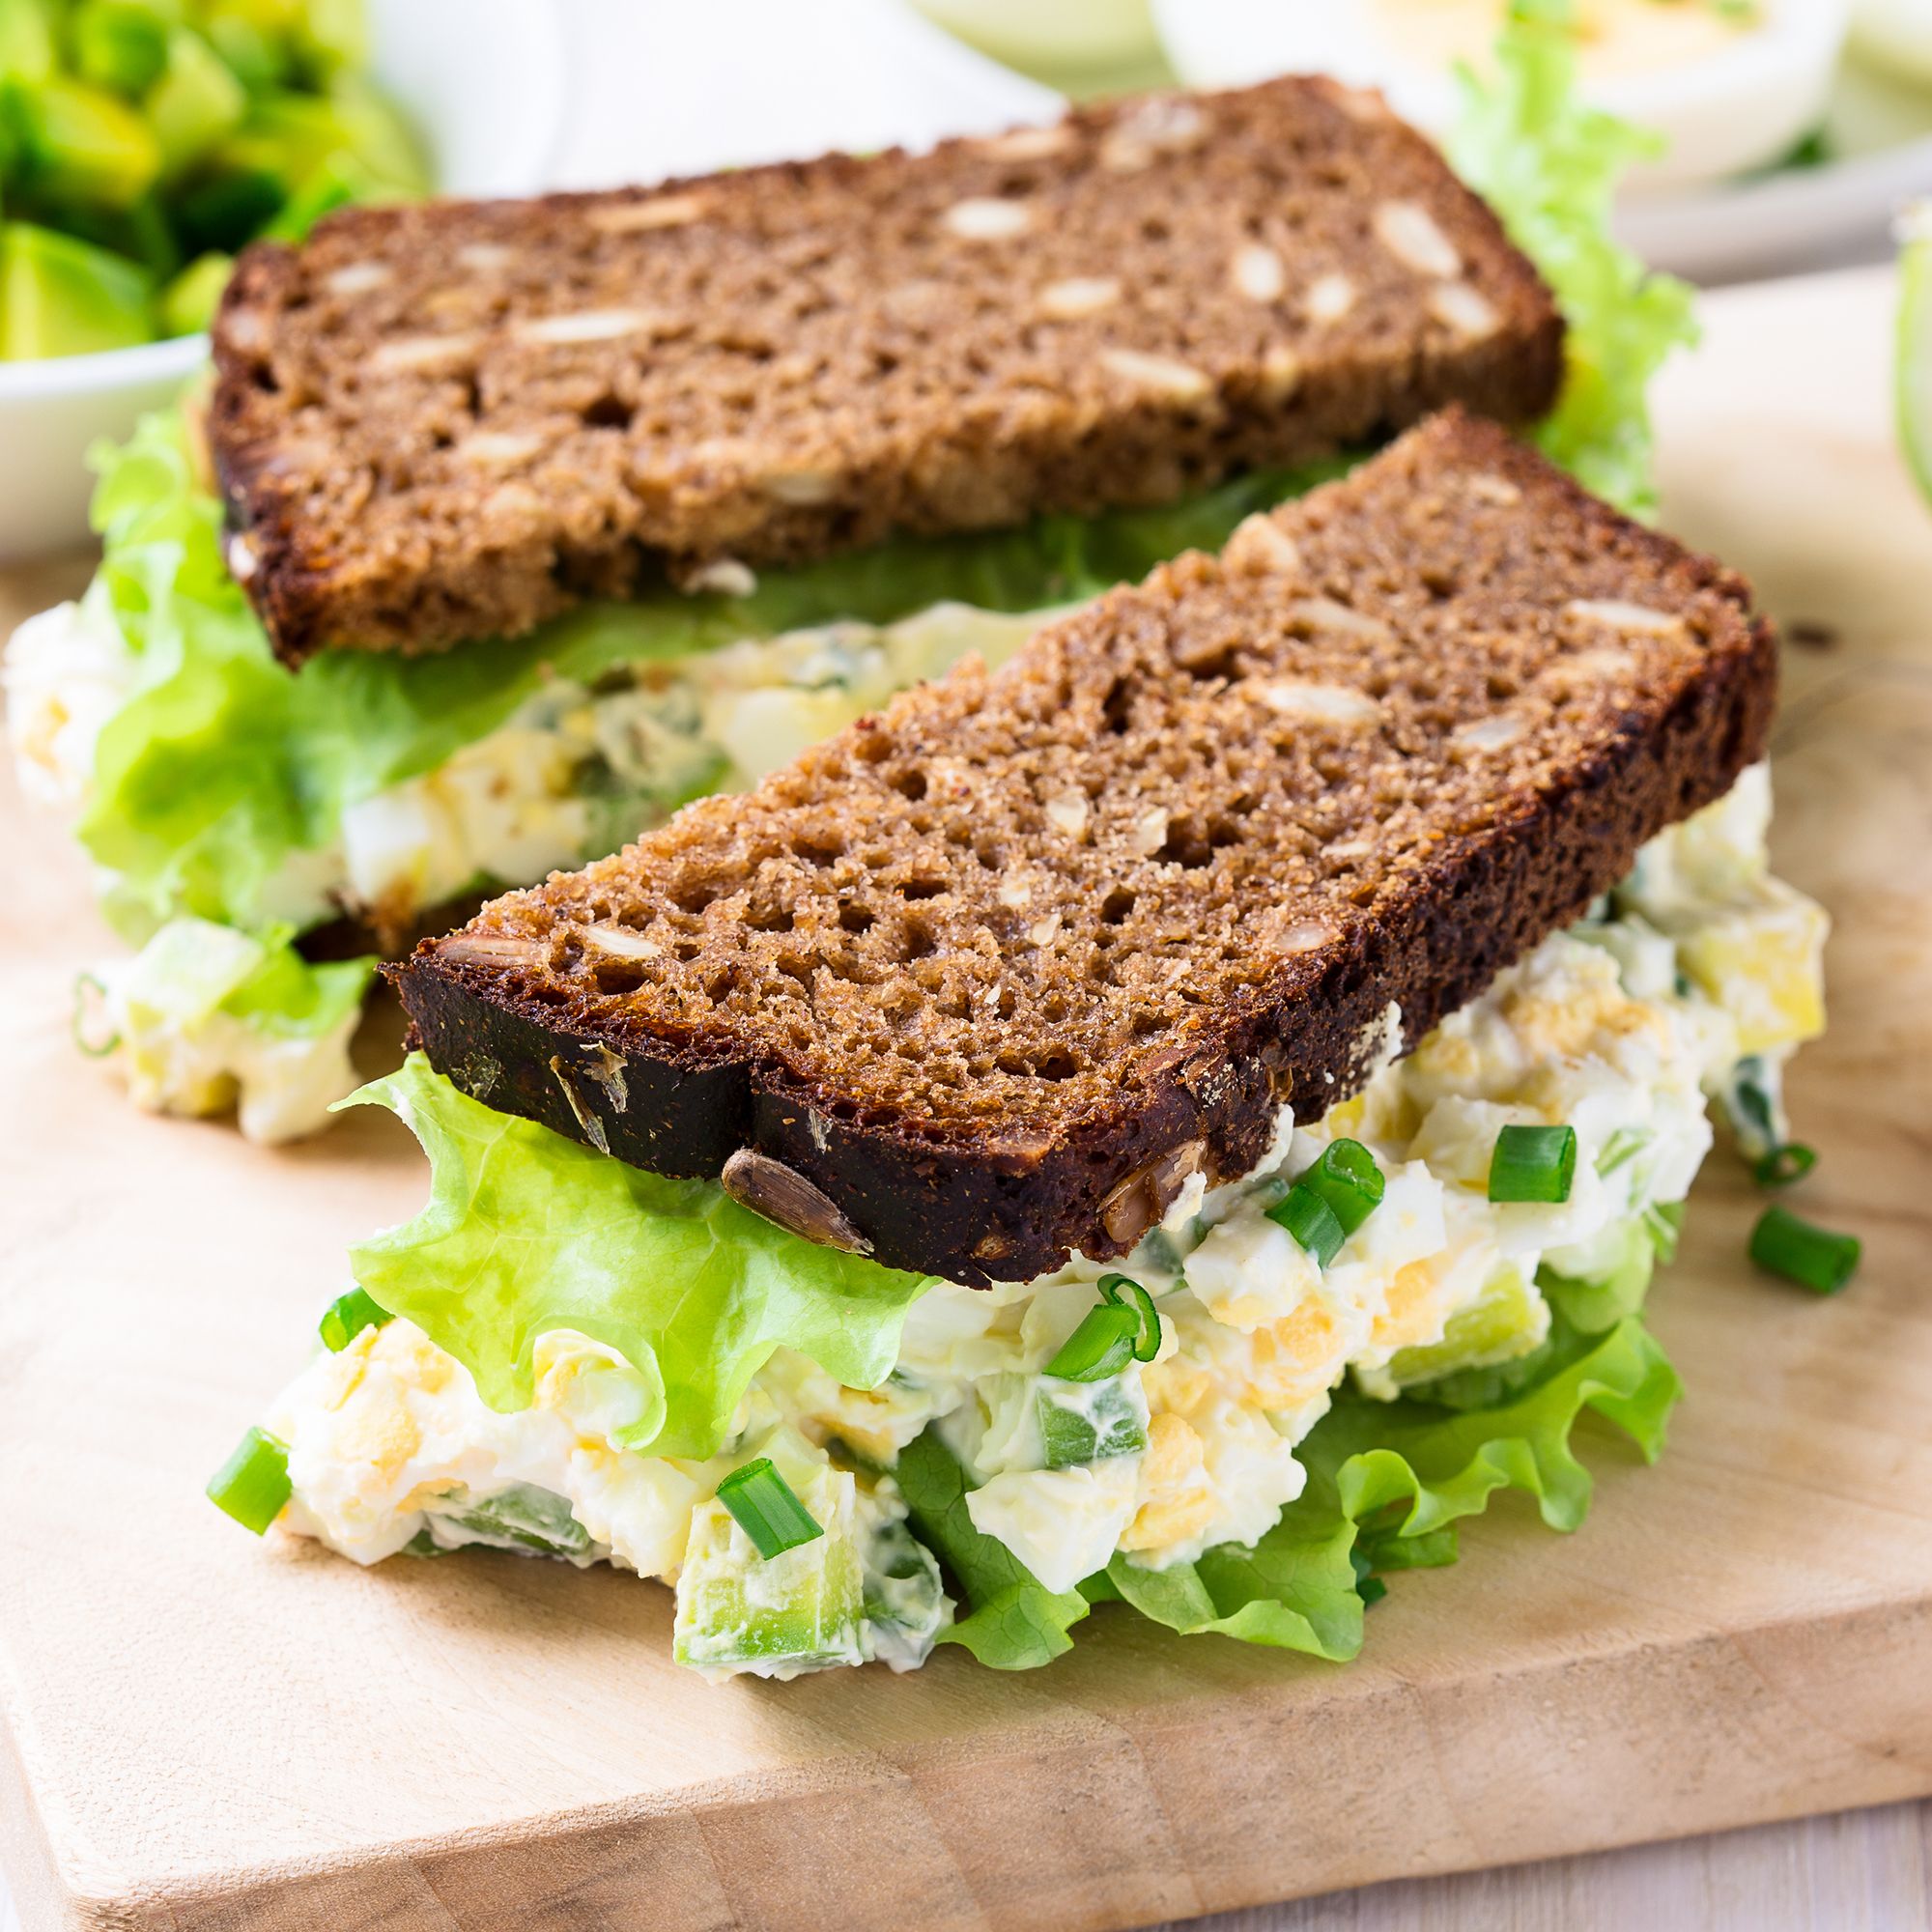 Healthy and Creative Sandwich Ideas for Light Lunches